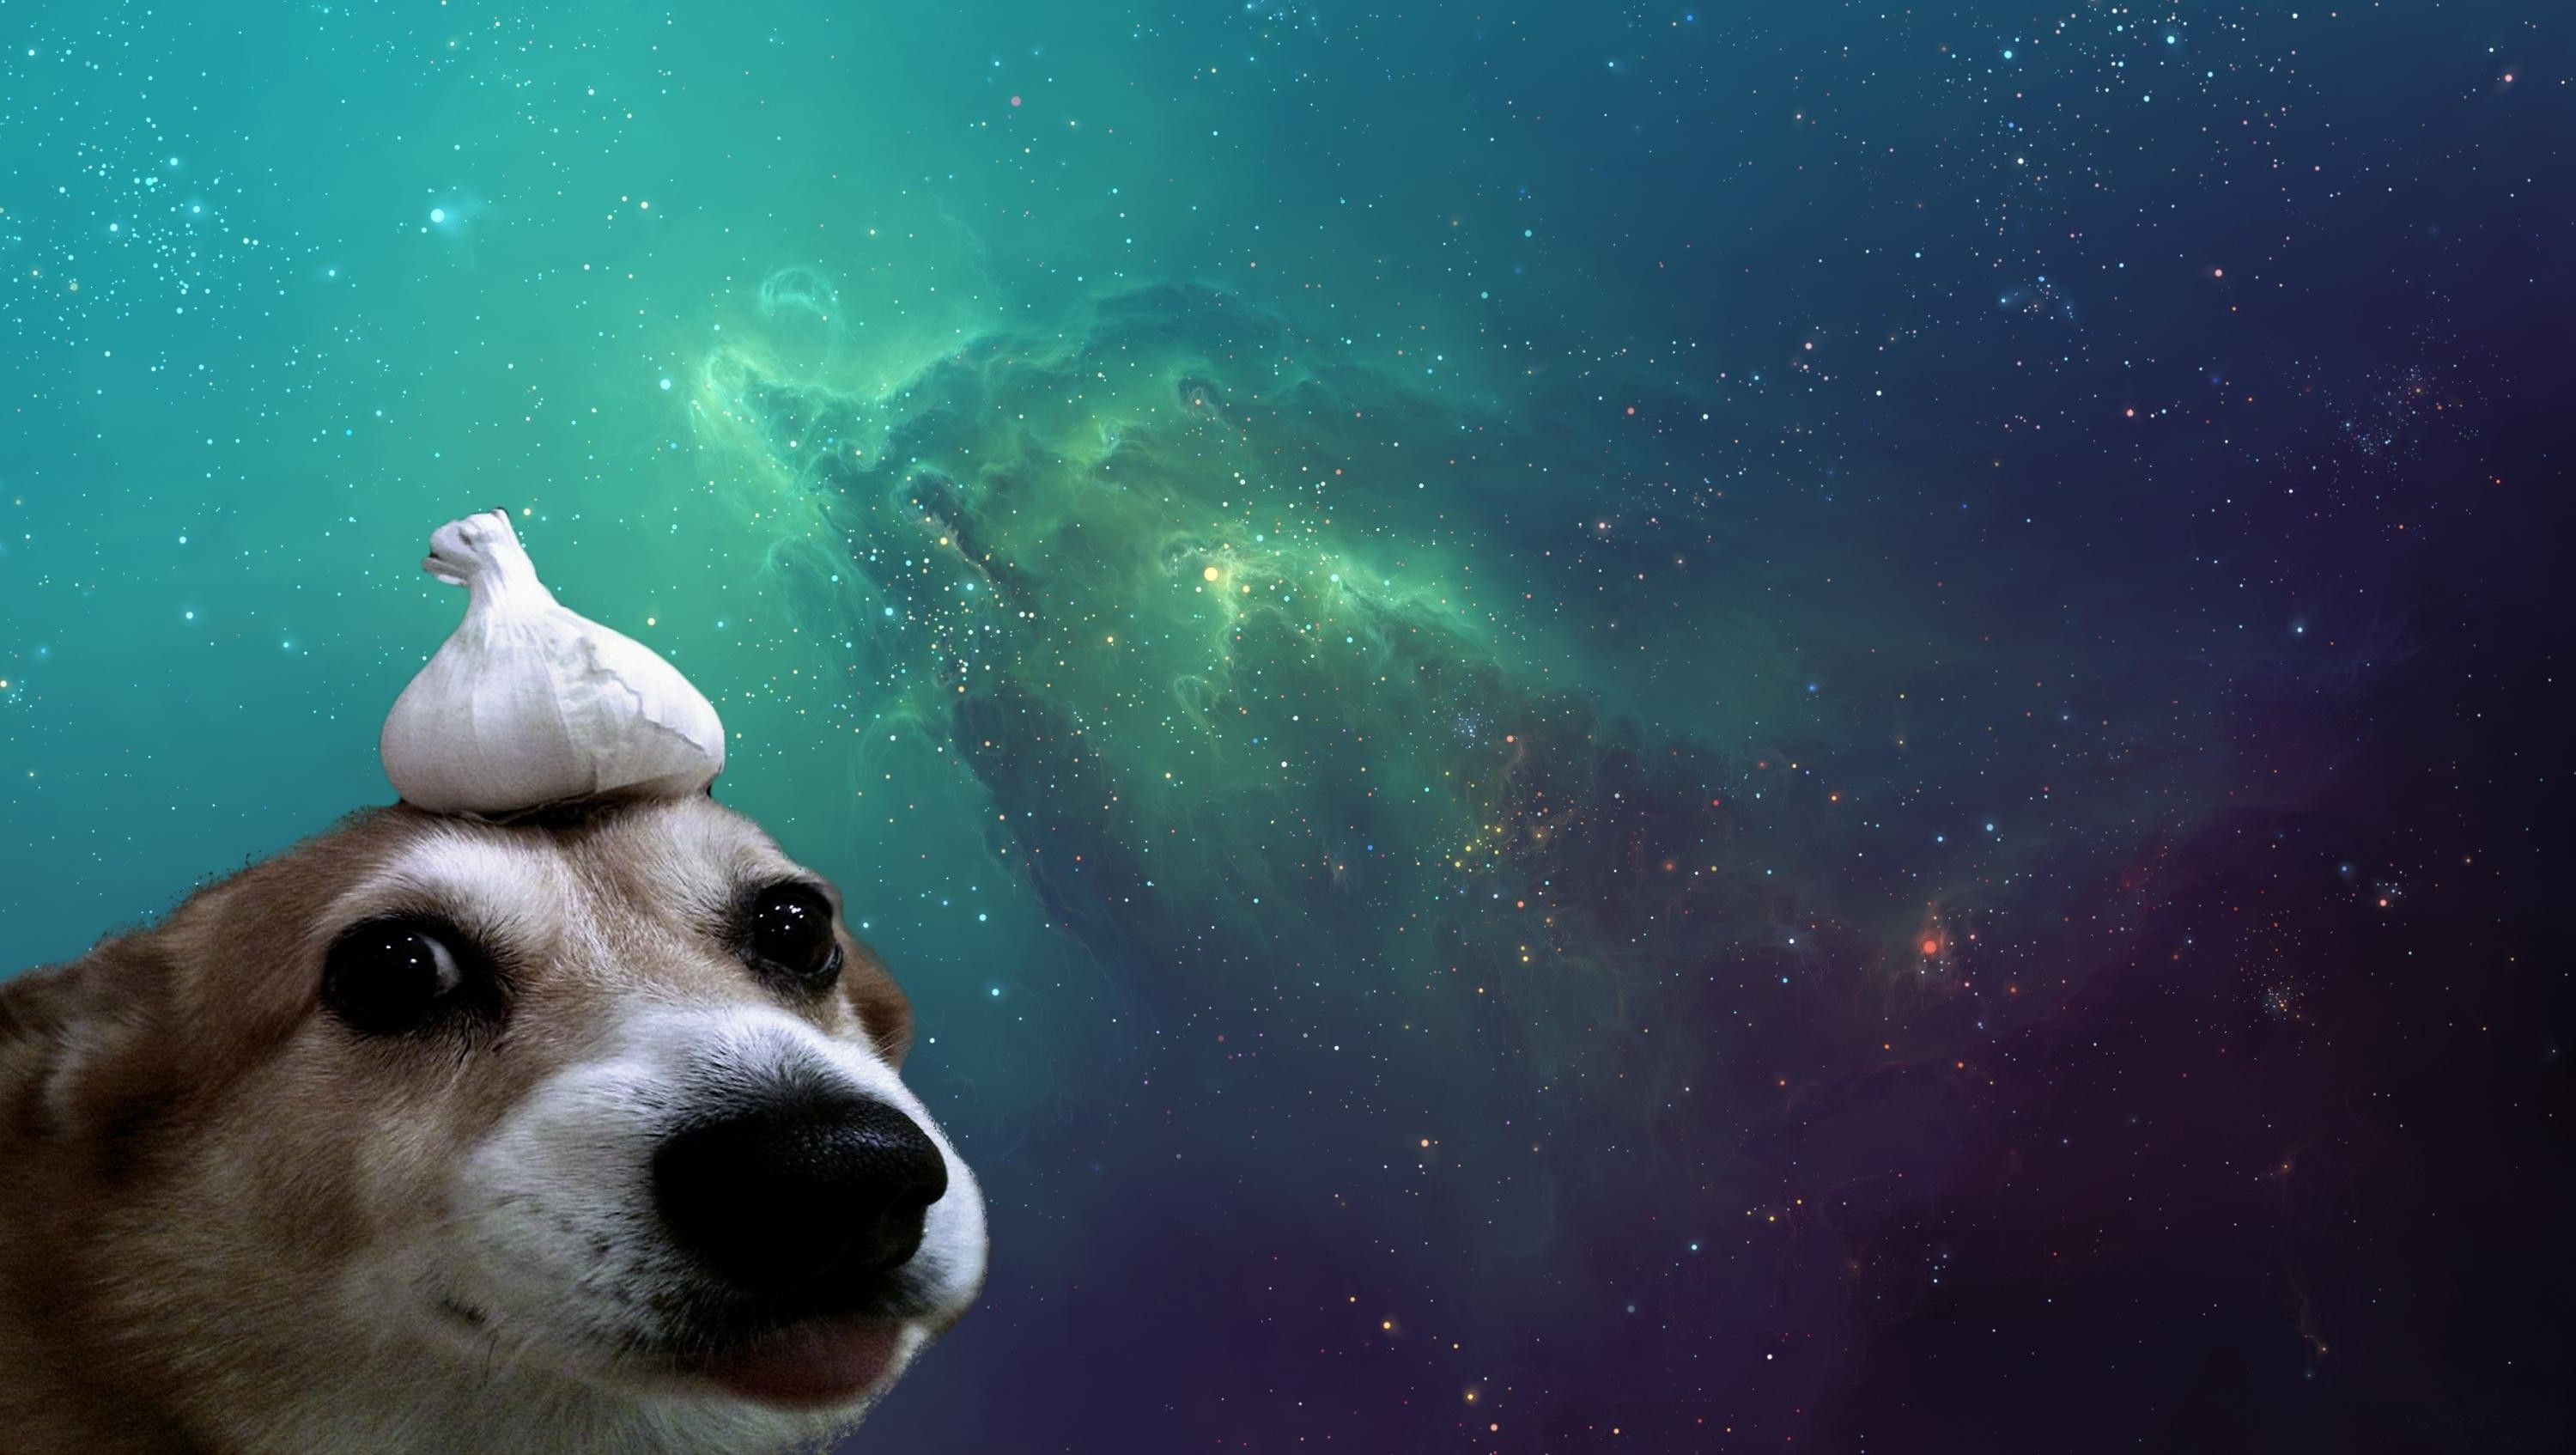 Dog In Space Wallpapers - Wallpaper Cave